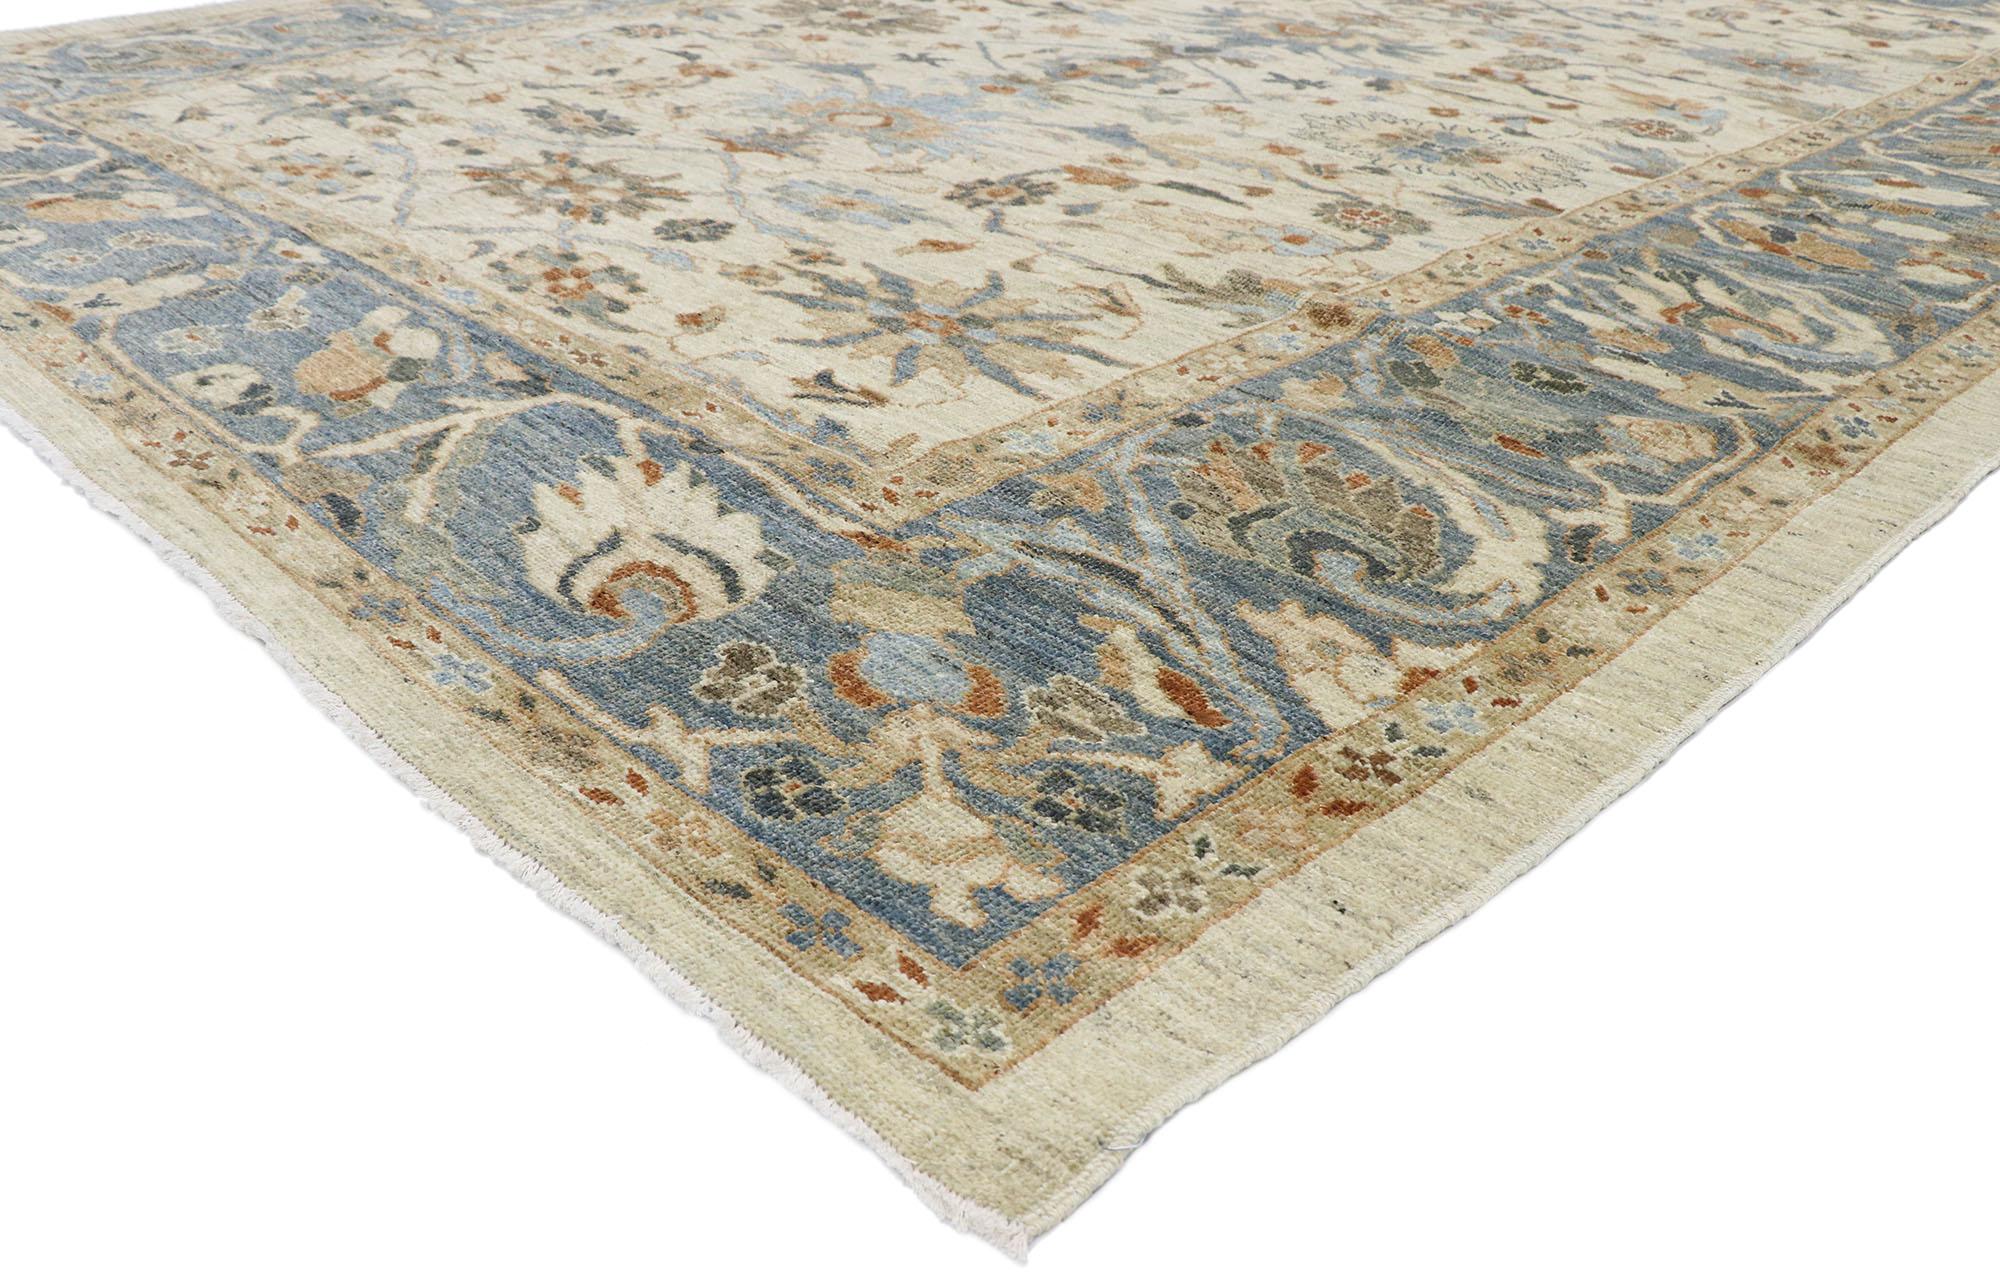 60911 New Contemporary Persian Sultanabad rug with Transitional Modern Style 09'05 x 12'03. This hand-knotted wool contemporary Persian Sultanabad rug features an all-over botanical trellis pattern spread across an abrashed tan striated field. An